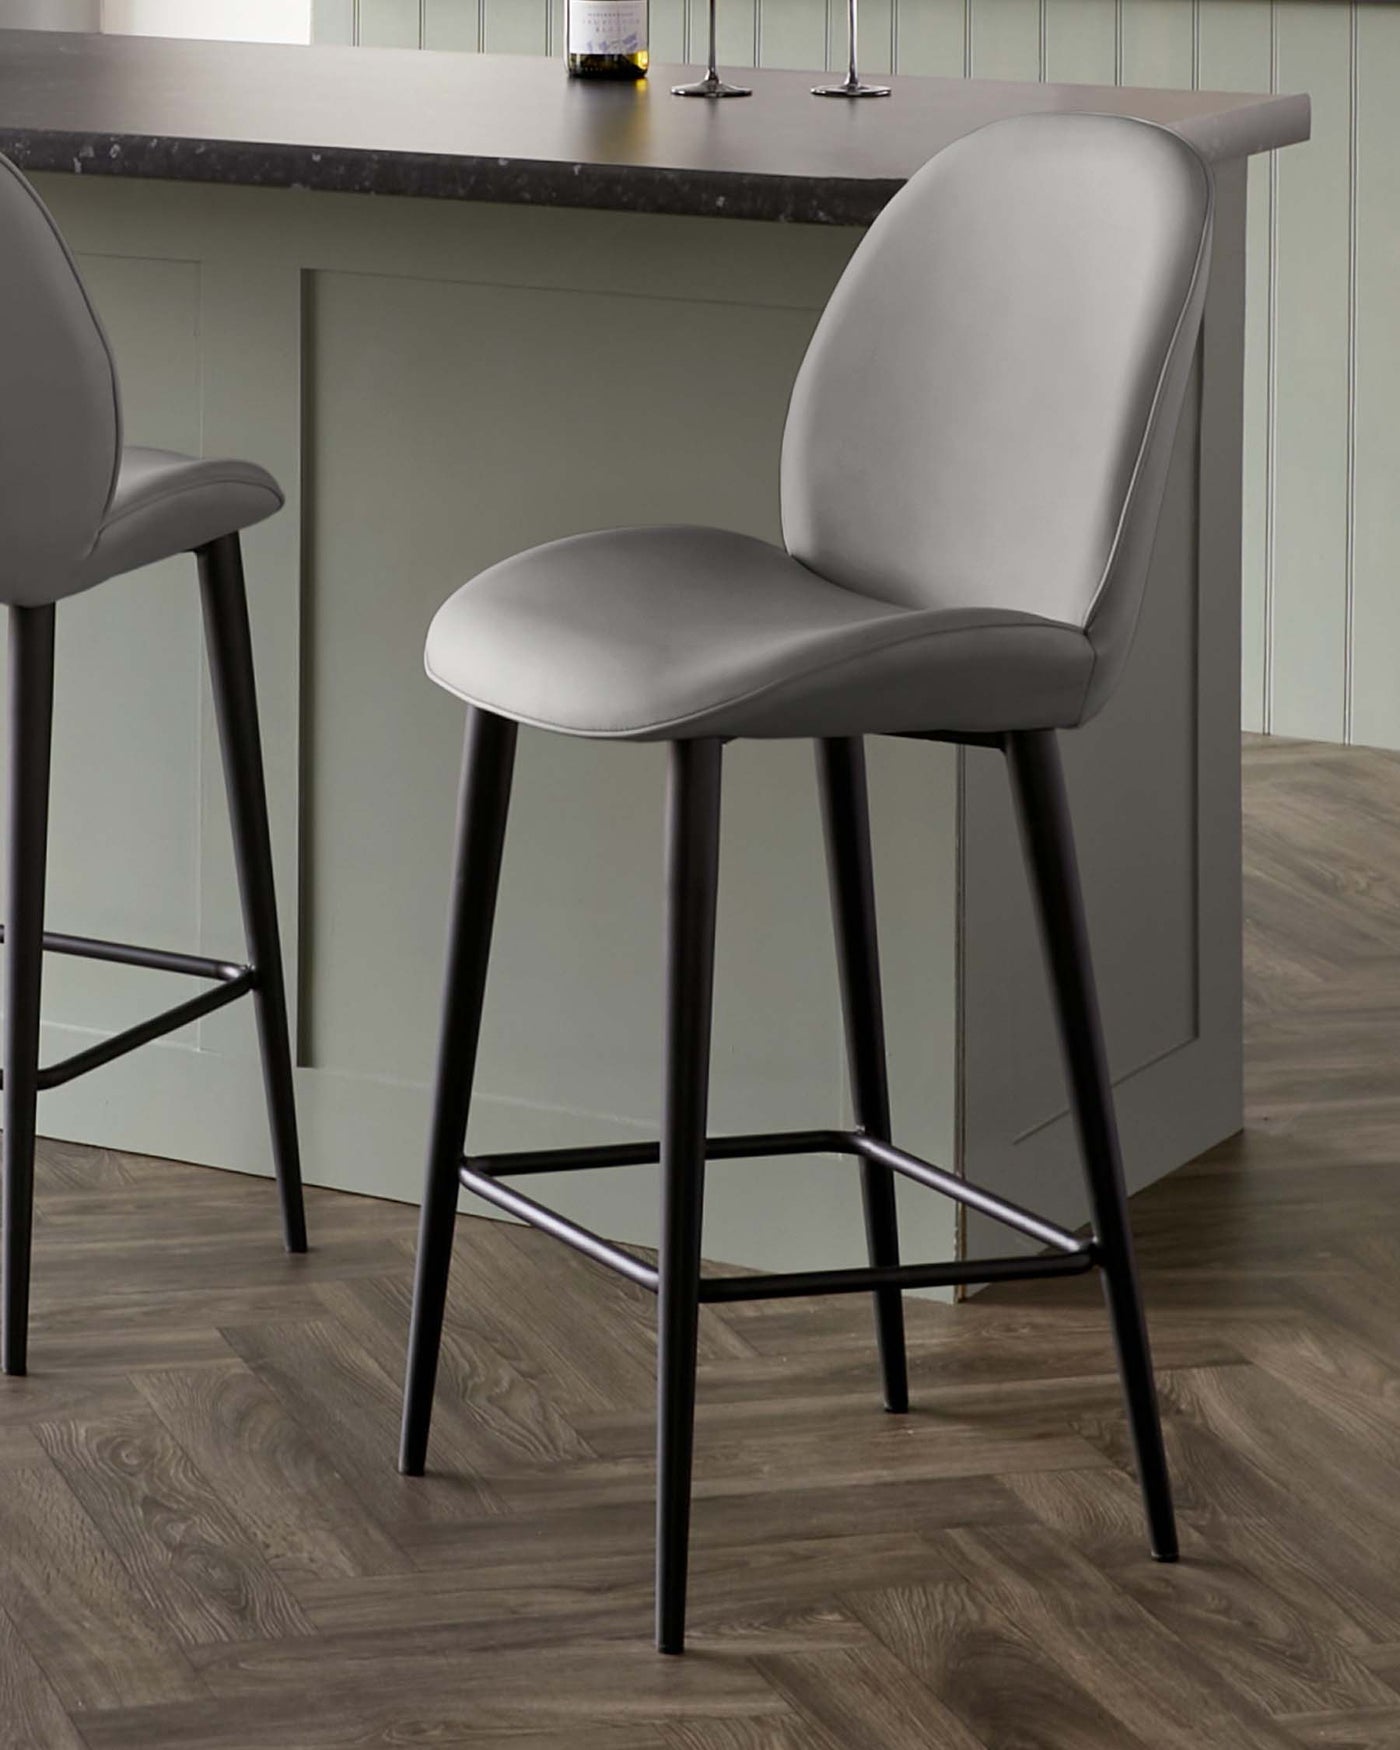 Modern barstool with a sleek grey upholstered seat and backrest on a sturdy black metal frame with a footrest bar, displayed in a contemporary kitchen setting with wooden flooring and a stone countertop.